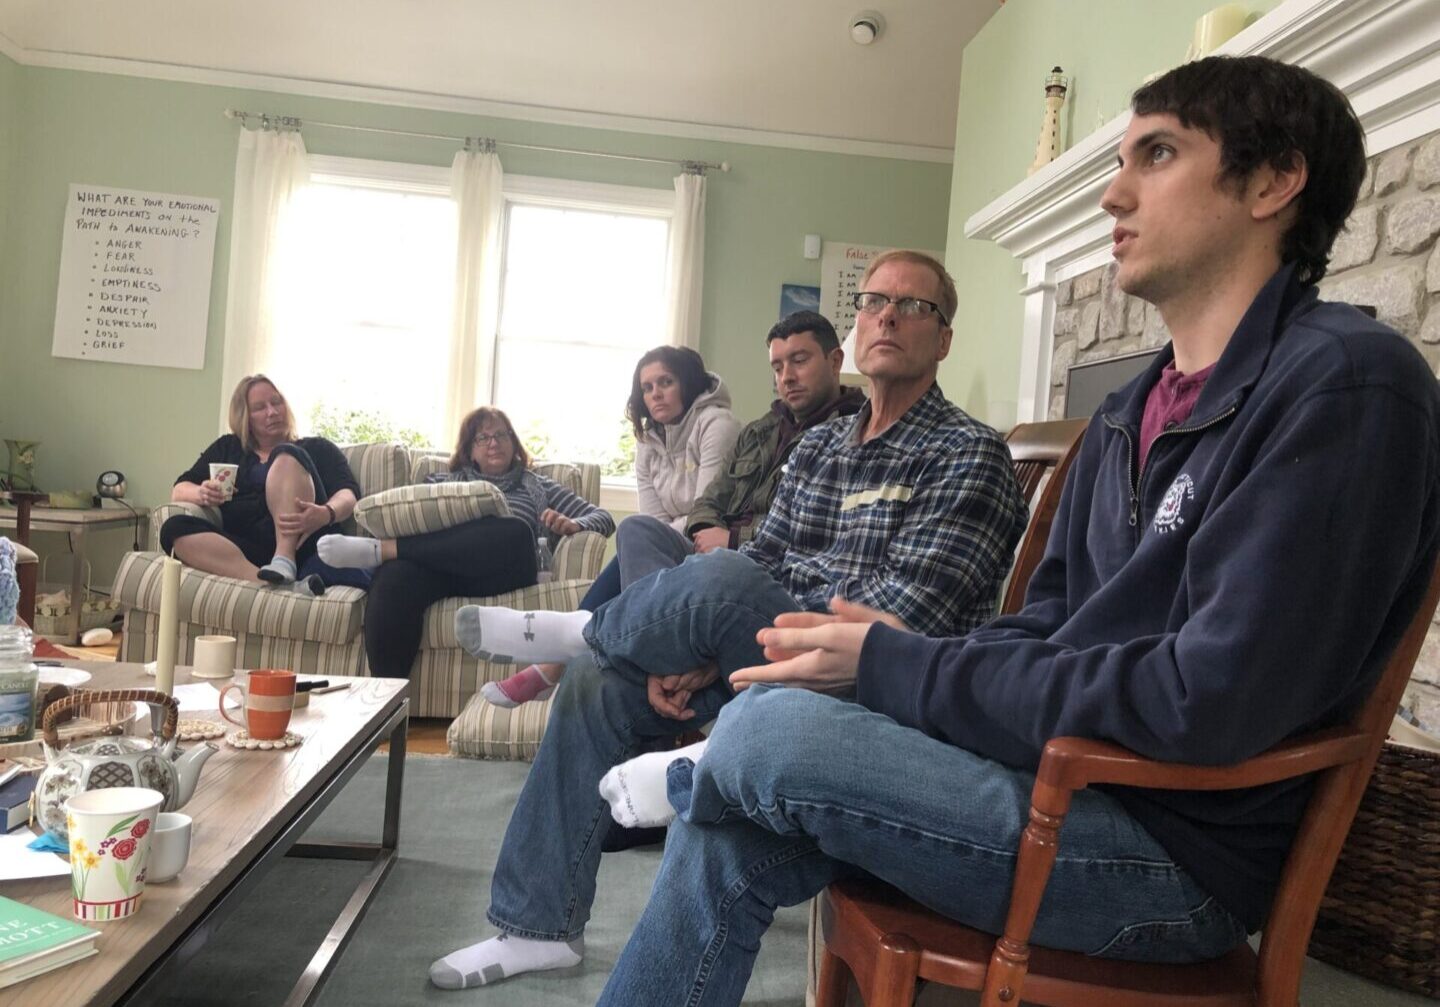 A group of people sitting in a living room.